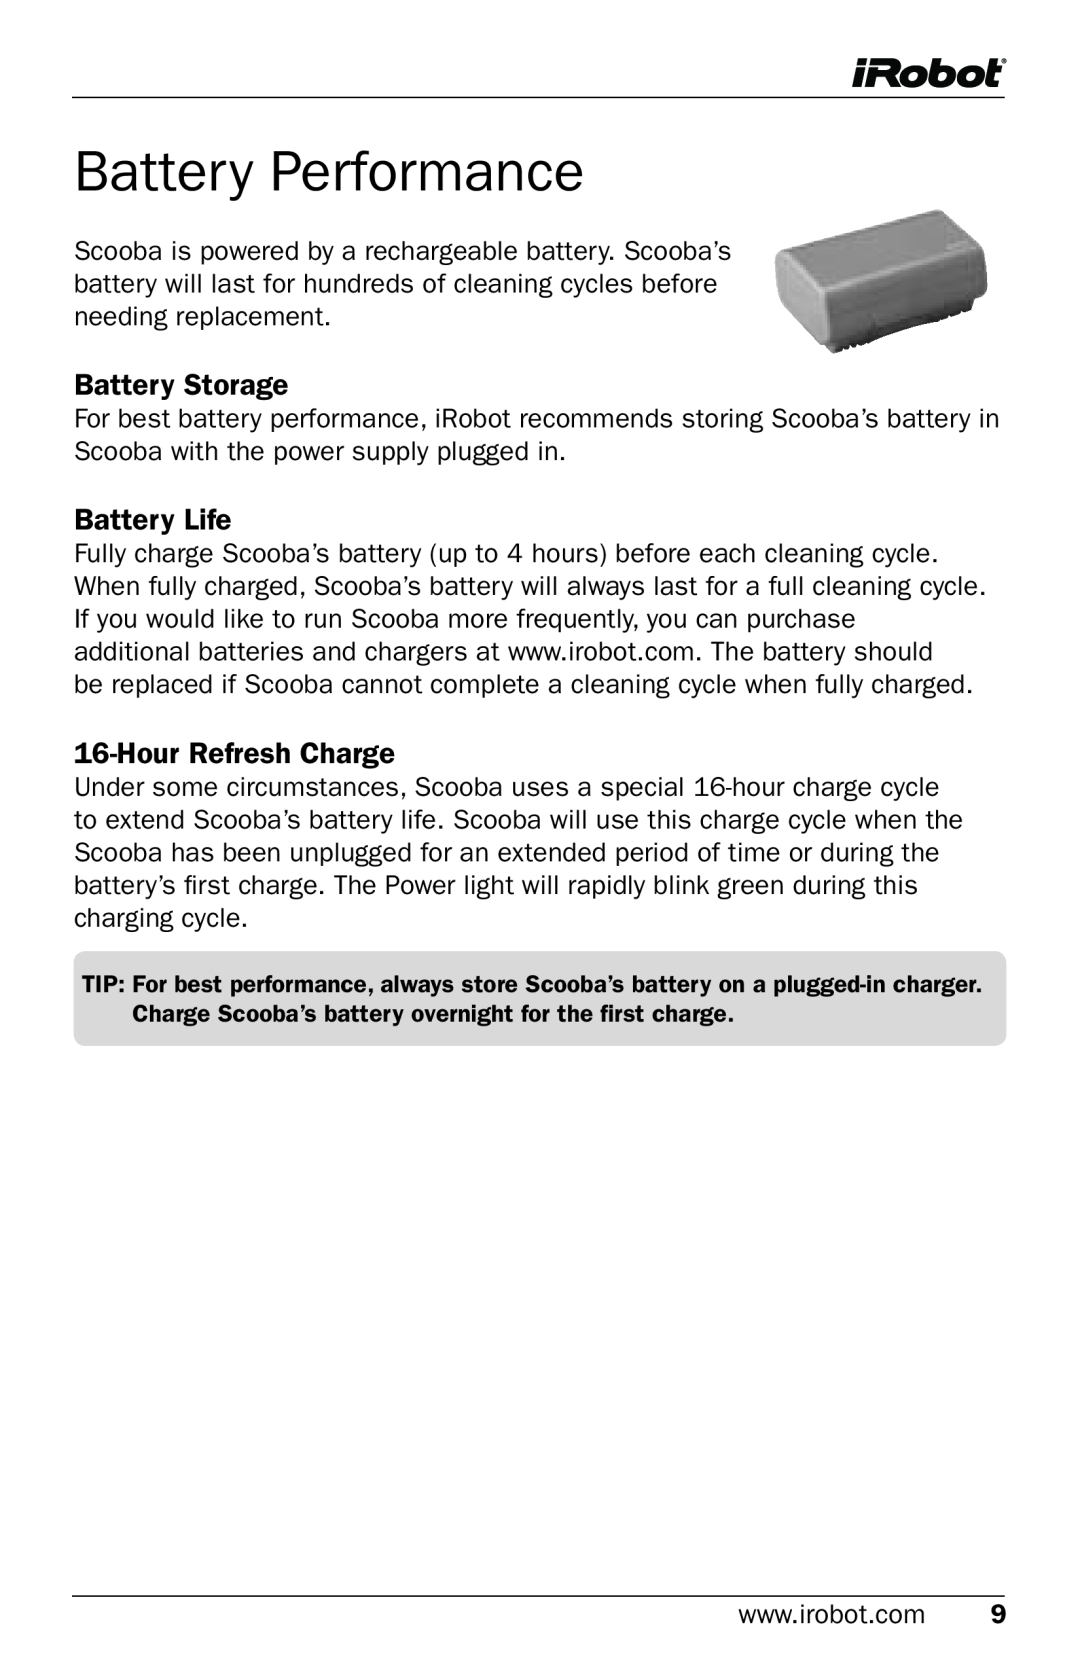 iRobot 5800 owner manual Battery Performance, Battery Storage, Battery Life, HourRefresh Charge 